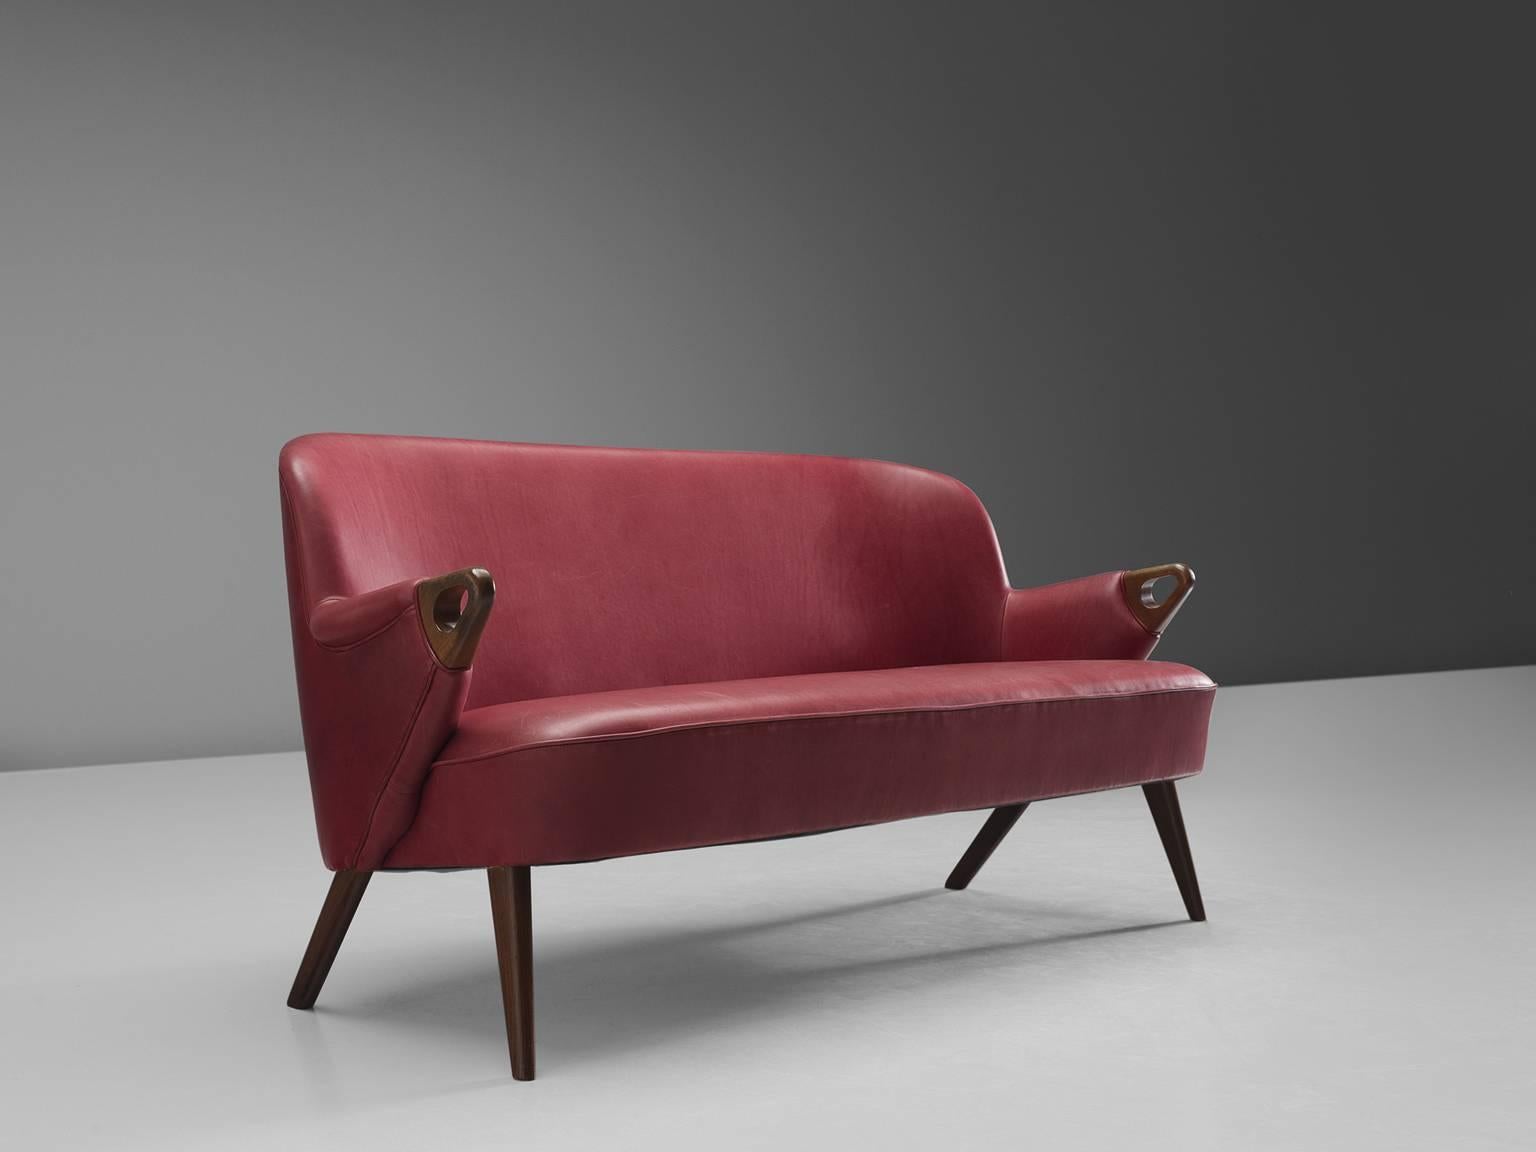 Two-seater sofa, leather and teak, 1960s, Denmark.

This small sofa features a simplistic, red leather shell and well-worked out detailing in the armrests and legs. The ends of the armrests are detailed with rounded triangles that are the end